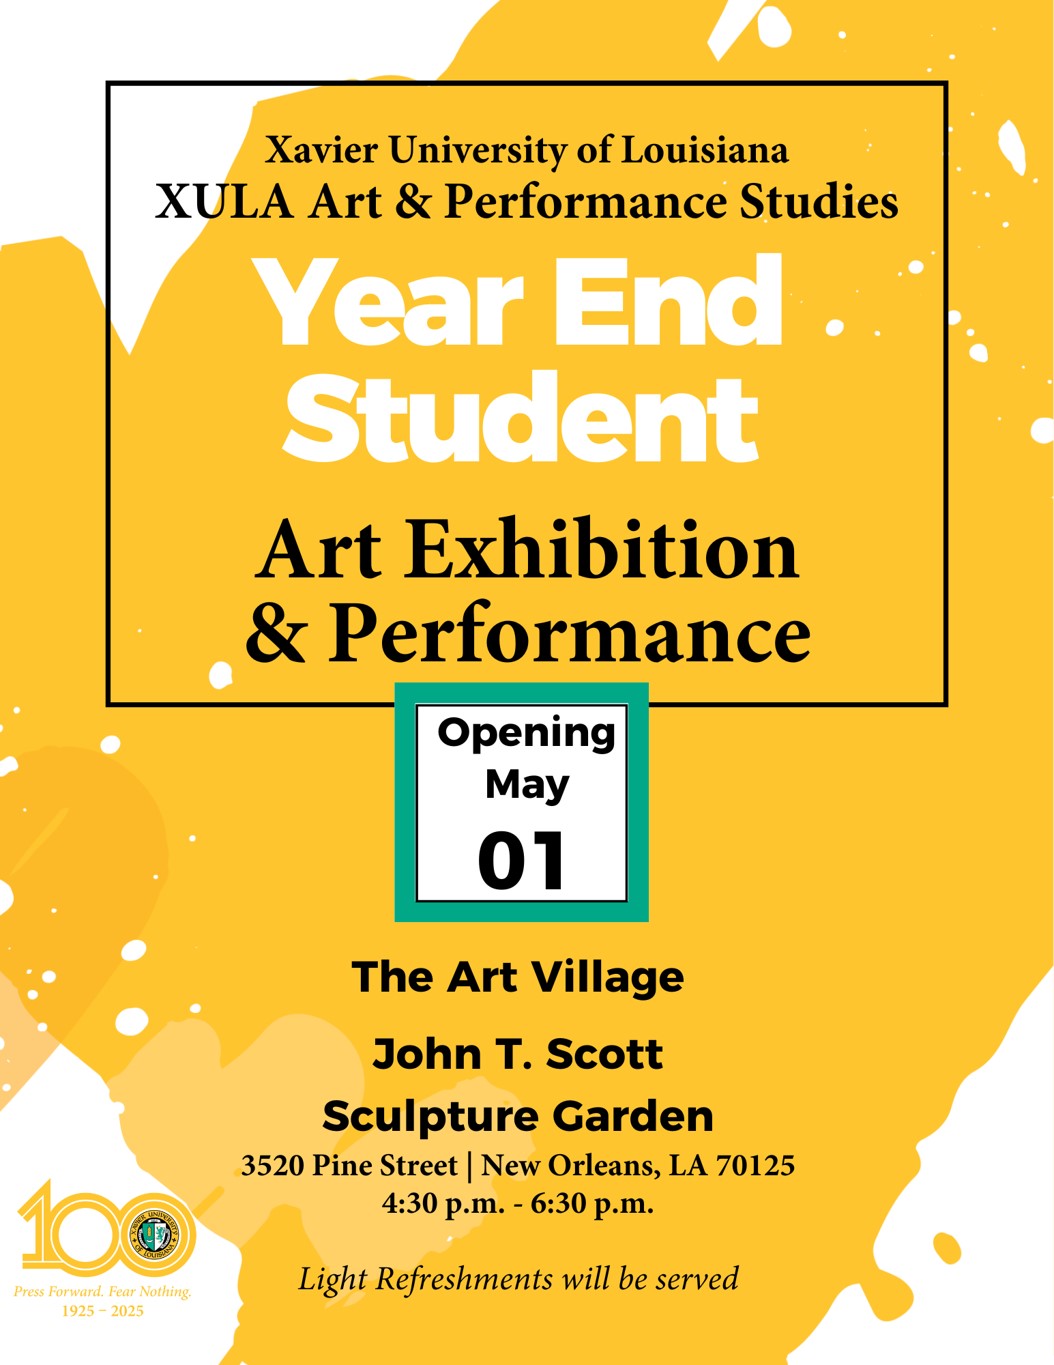 Year-End Student Art Exhibition & Performance